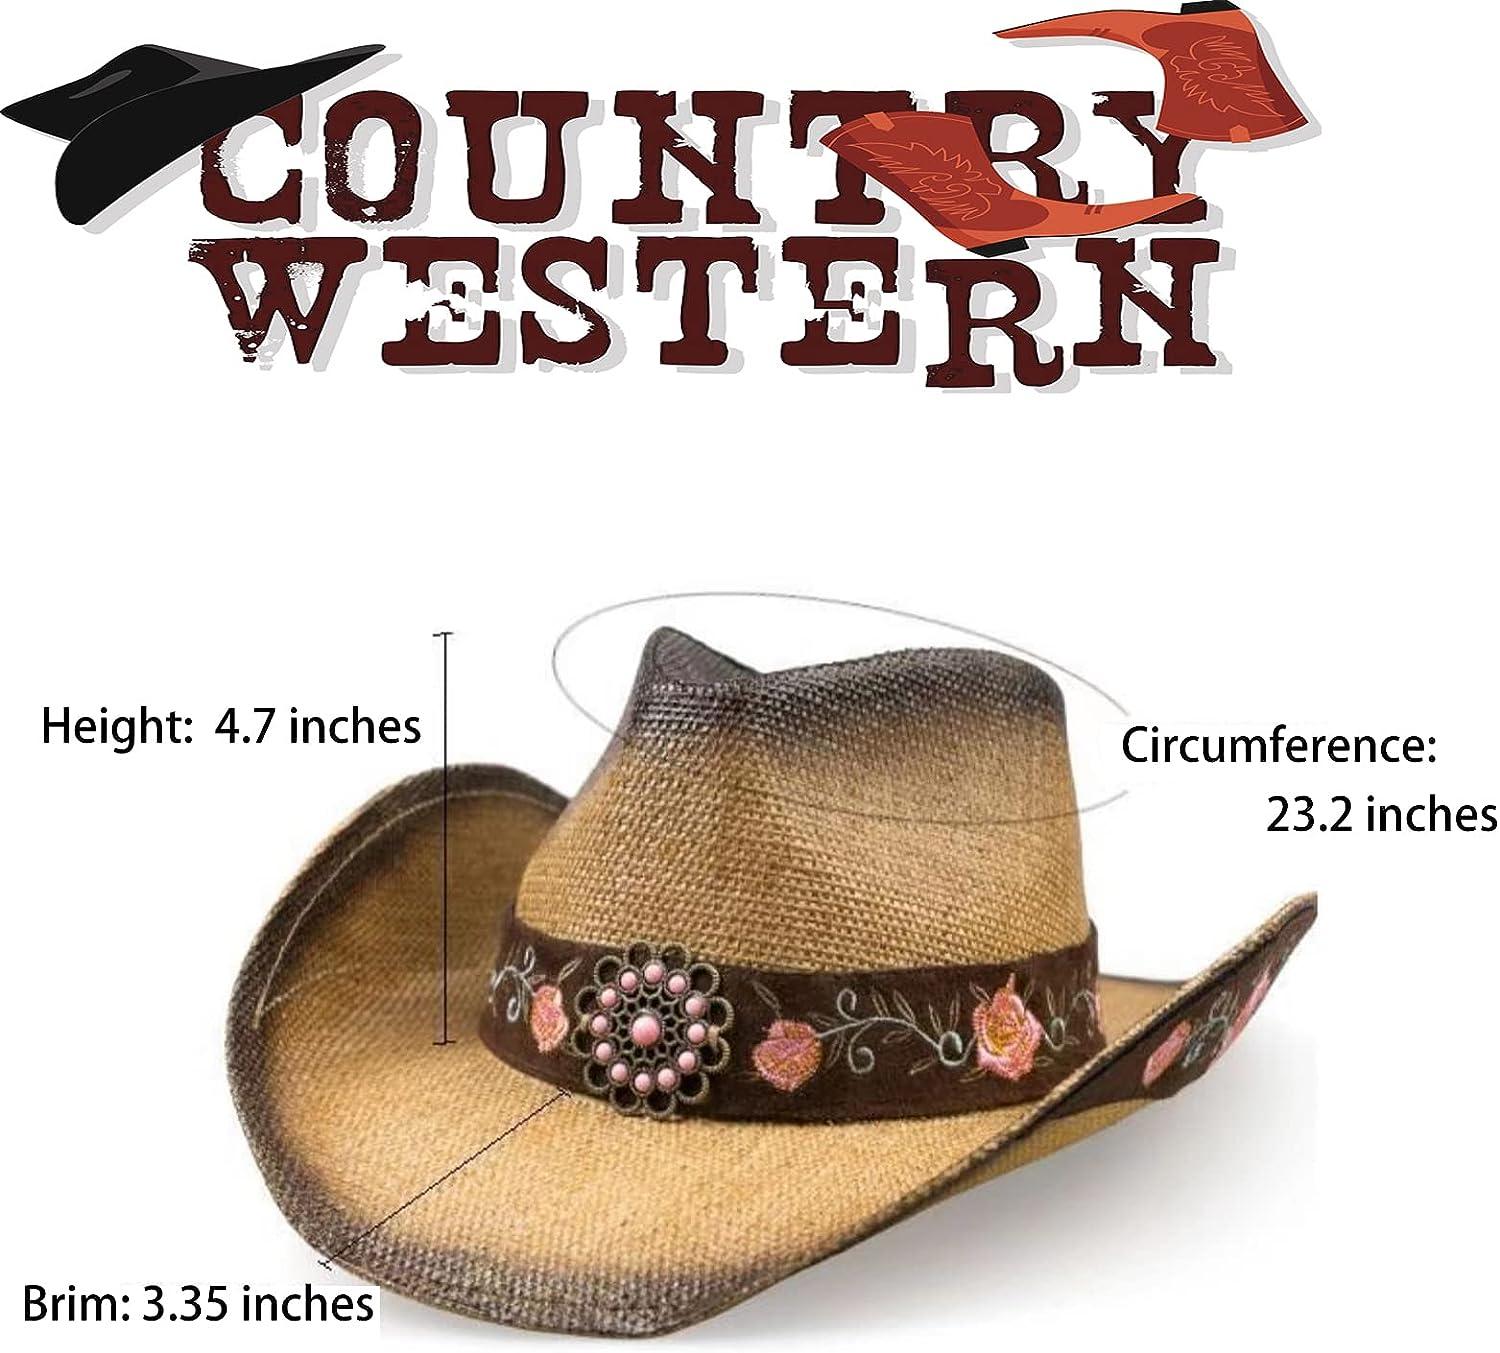 Cowboy Hats for Women, Brown Cowgirl Hats Classic Straw Western